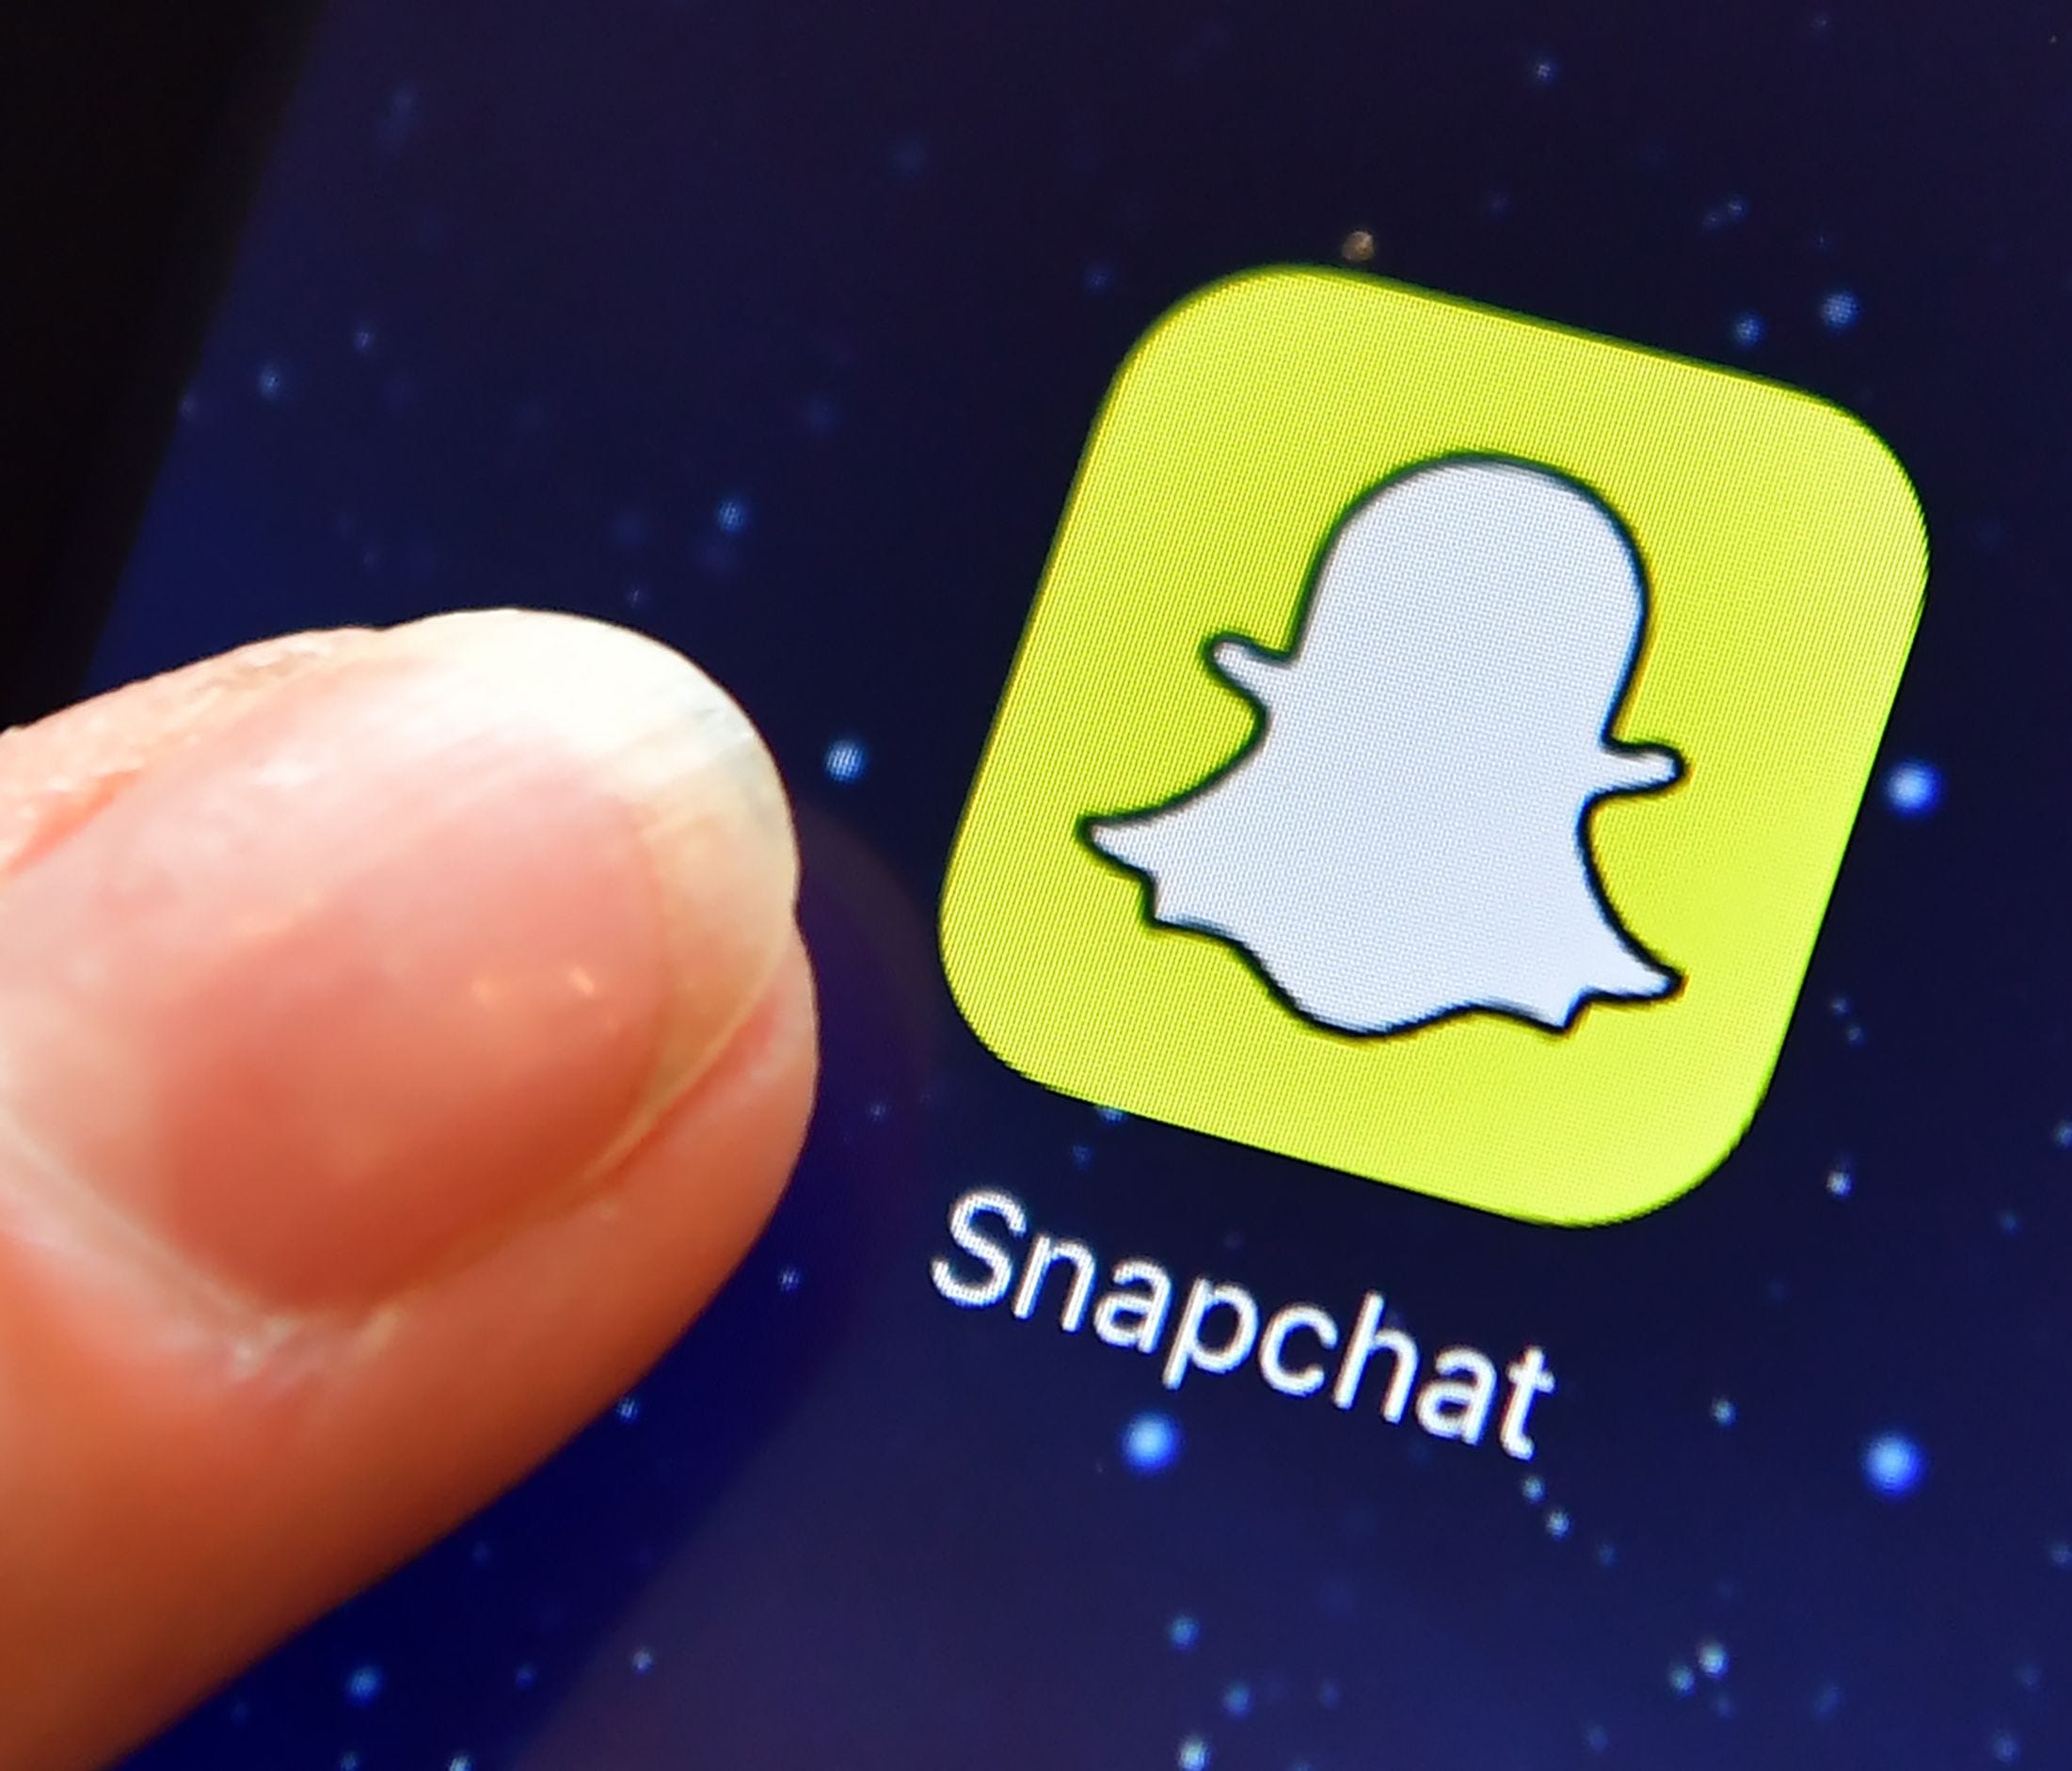 Snap Inc., the parent company of Snapchat, the company behind snapchat debuts on the New York Stock Exchange on March 1, 2017, under the ticker symbol SNAP.  Shares are expected to price March 1 after the market closes and begin trading on Thursday. 